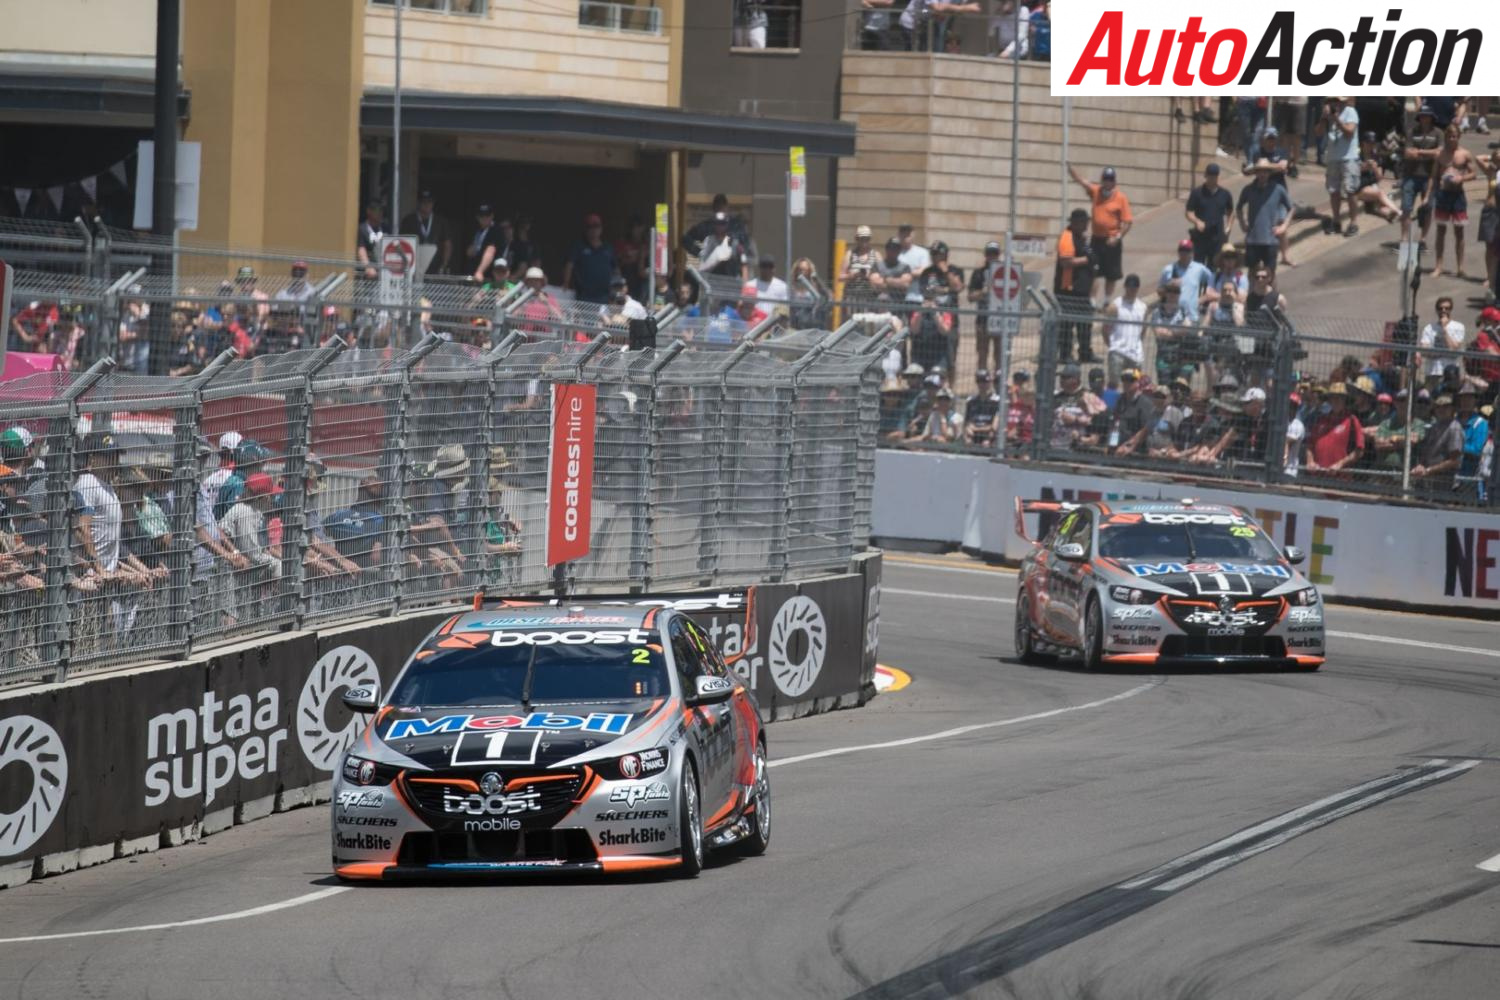 Walkinshaw already has Boost replacement - Photo: InSyde Media